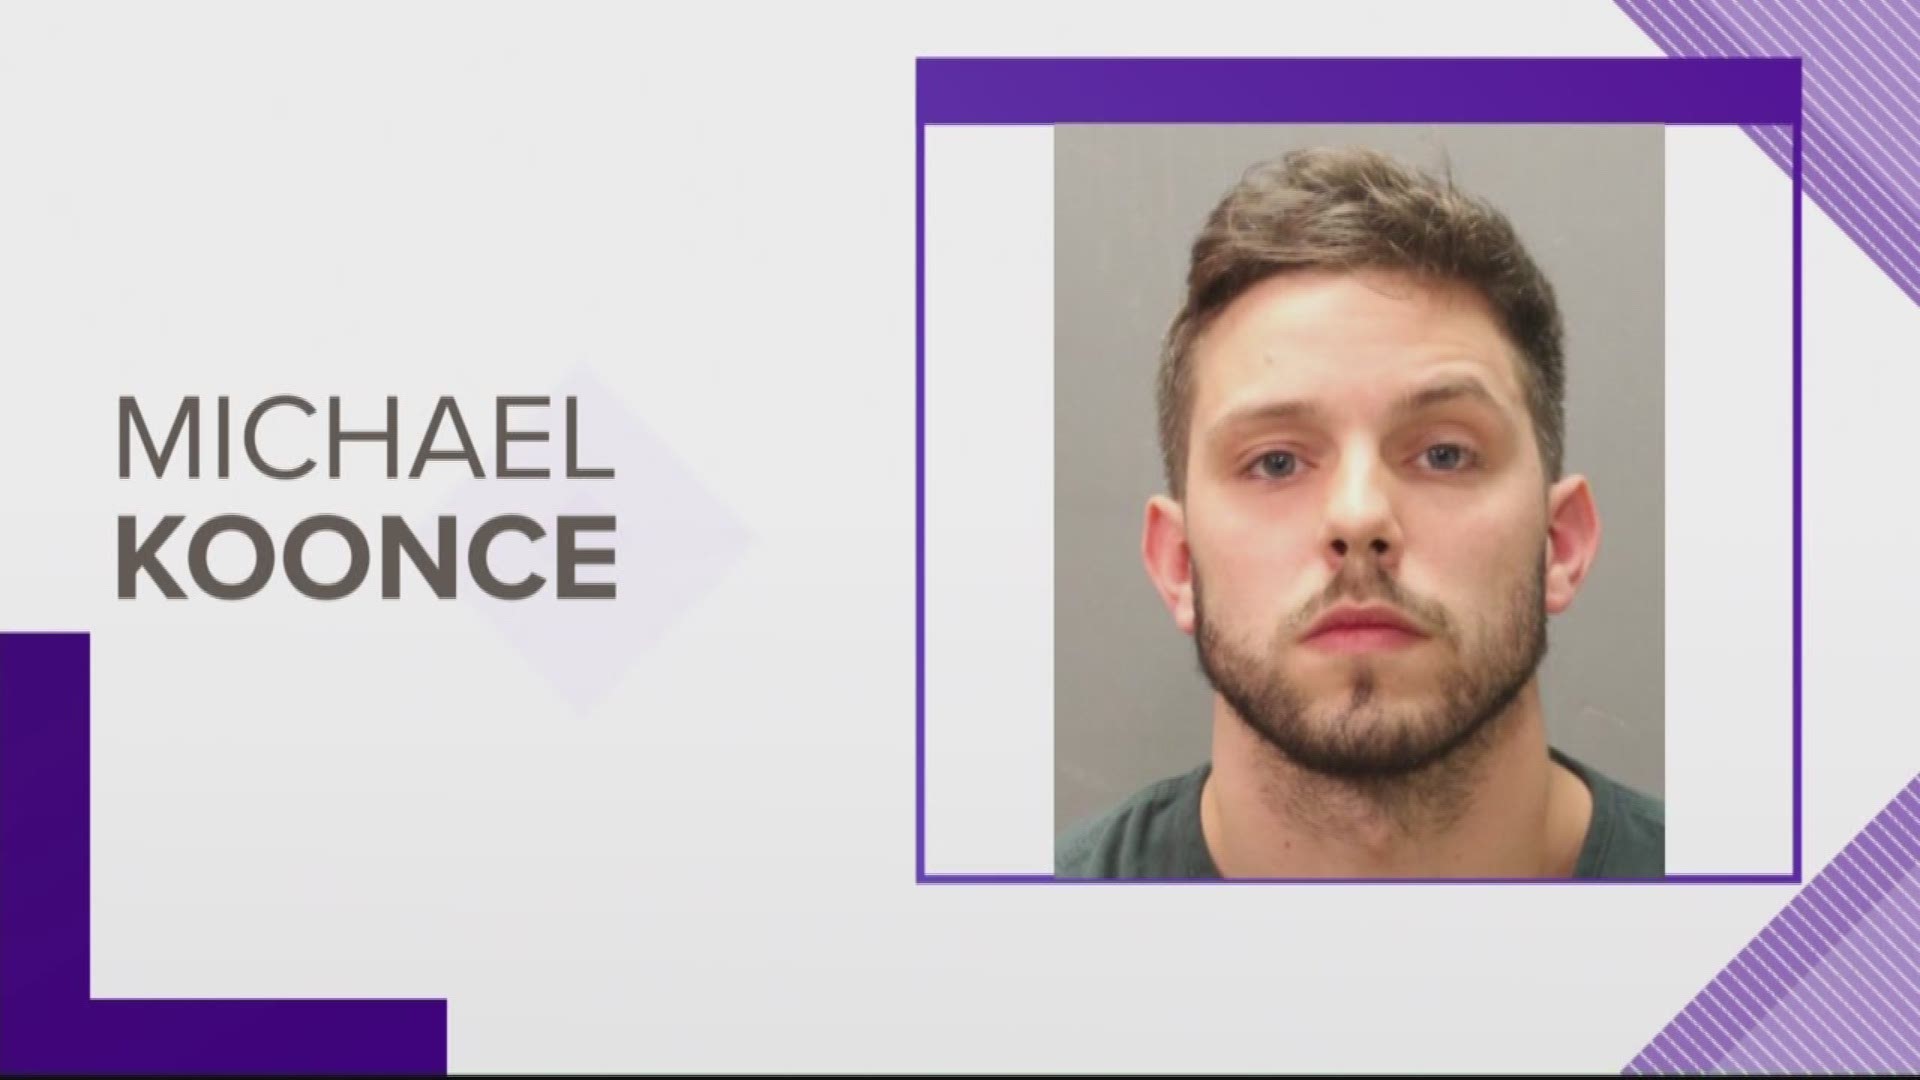 20-year-old Michael Koonce was arrested and charged with lew and lascivious conduct, which is a felony.